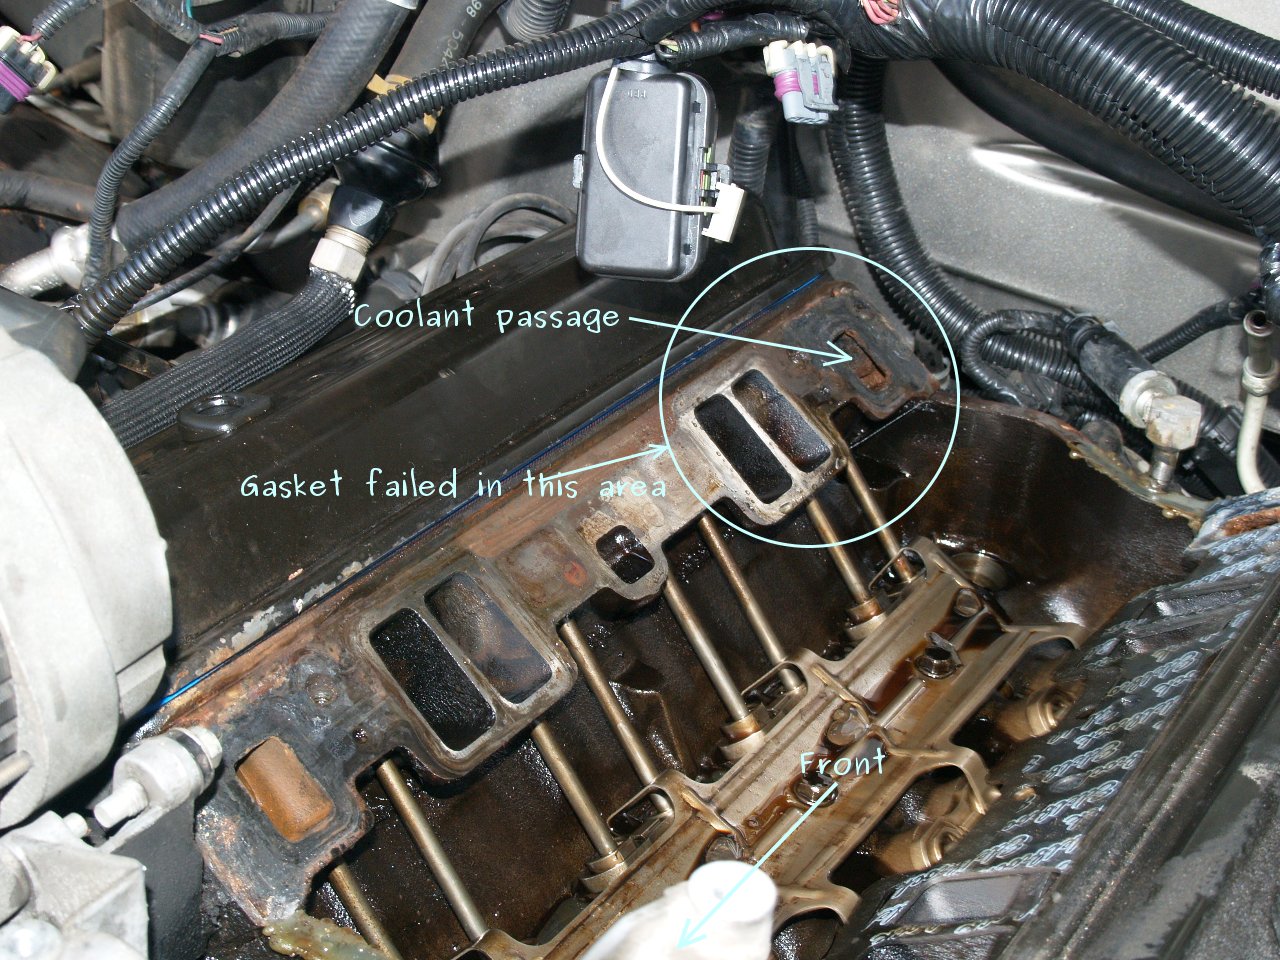 See P0121 in engine